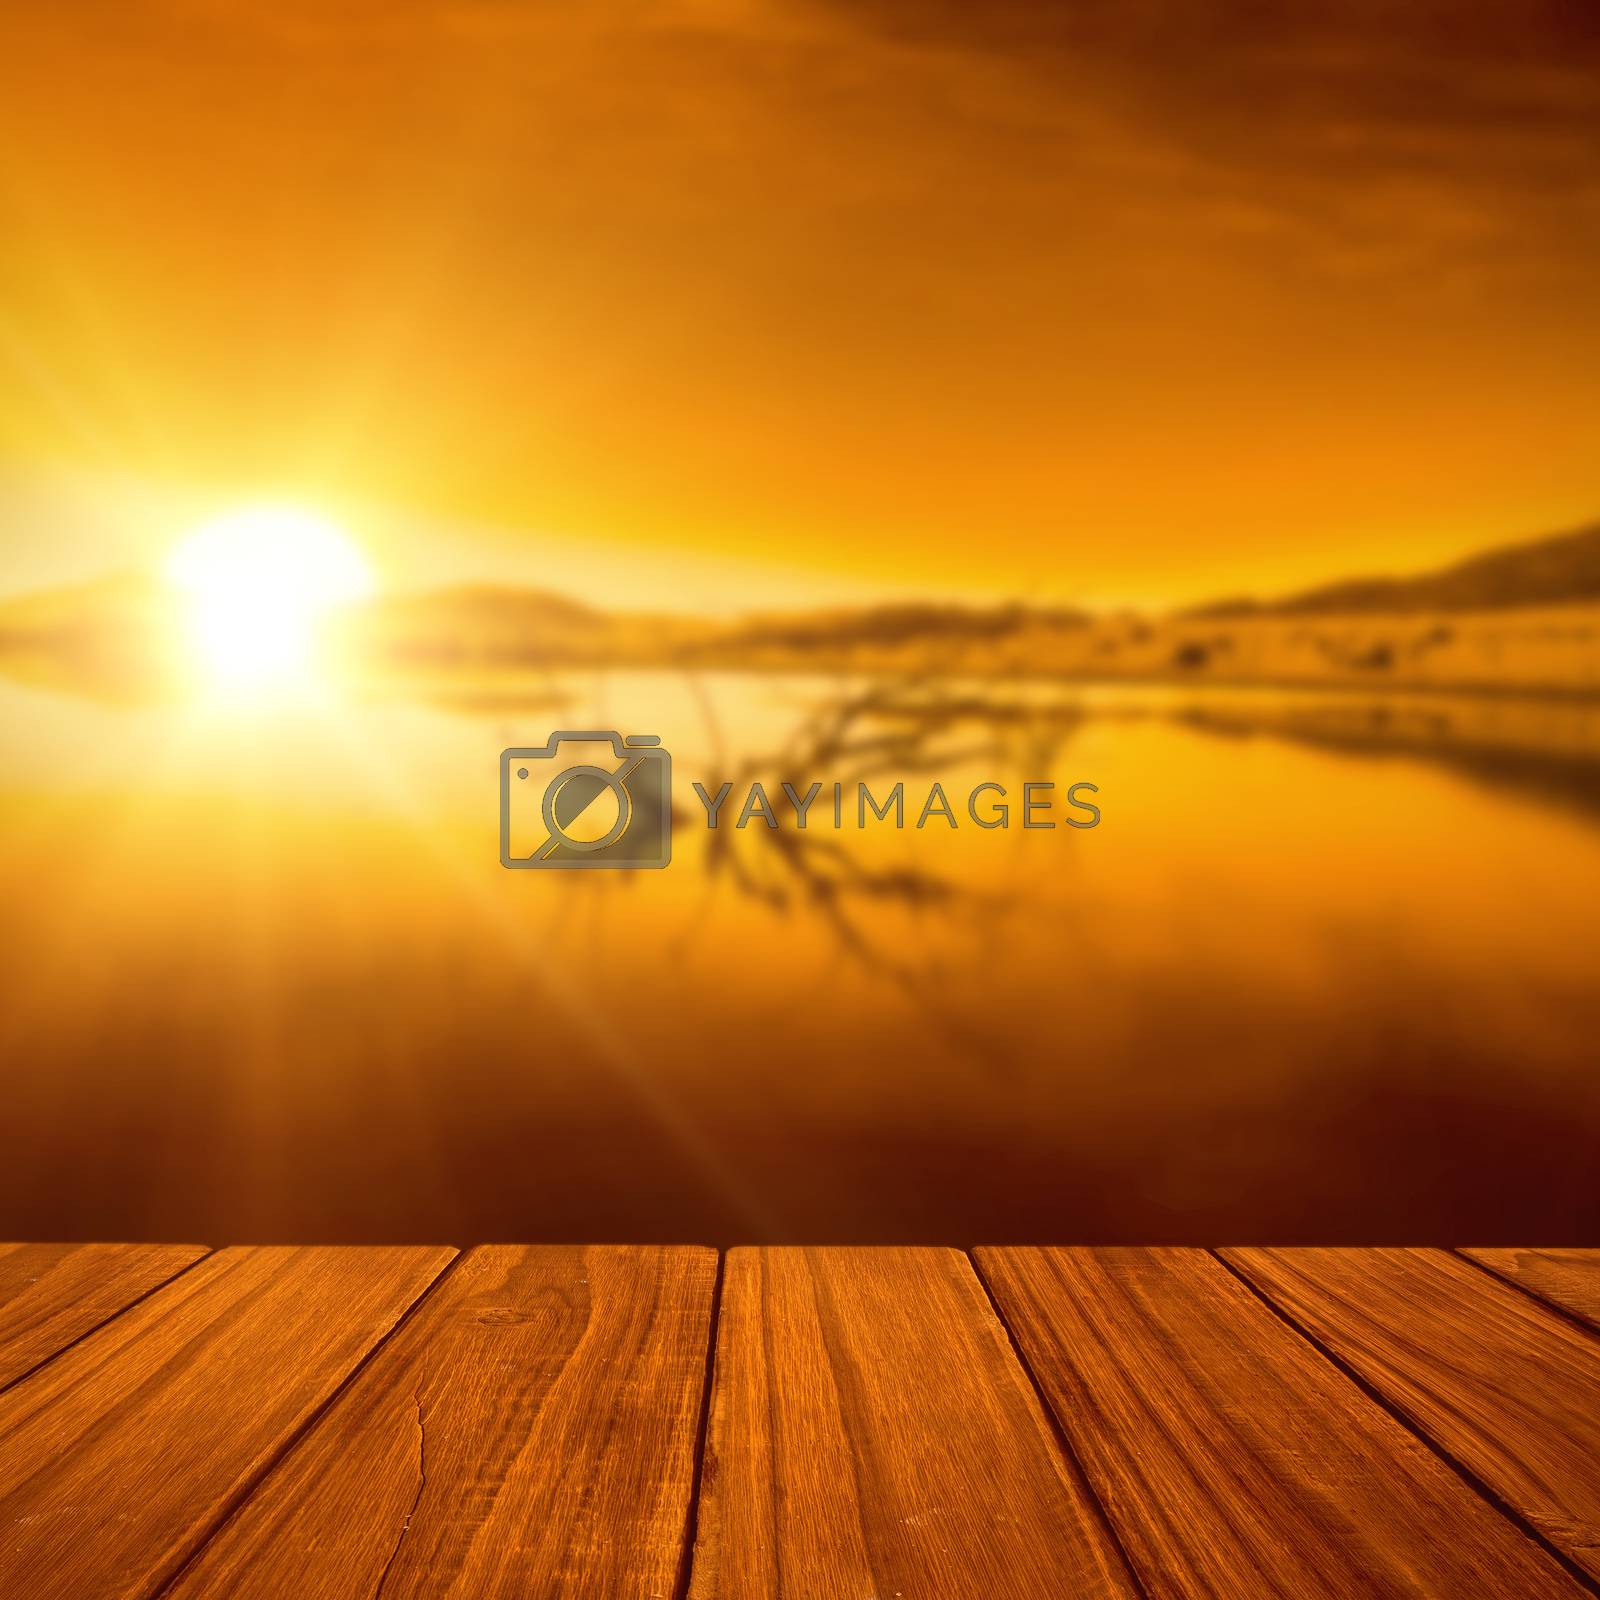 Royalty free image of Composite image of high angle view of hardwood floor by Wavebreakmedia